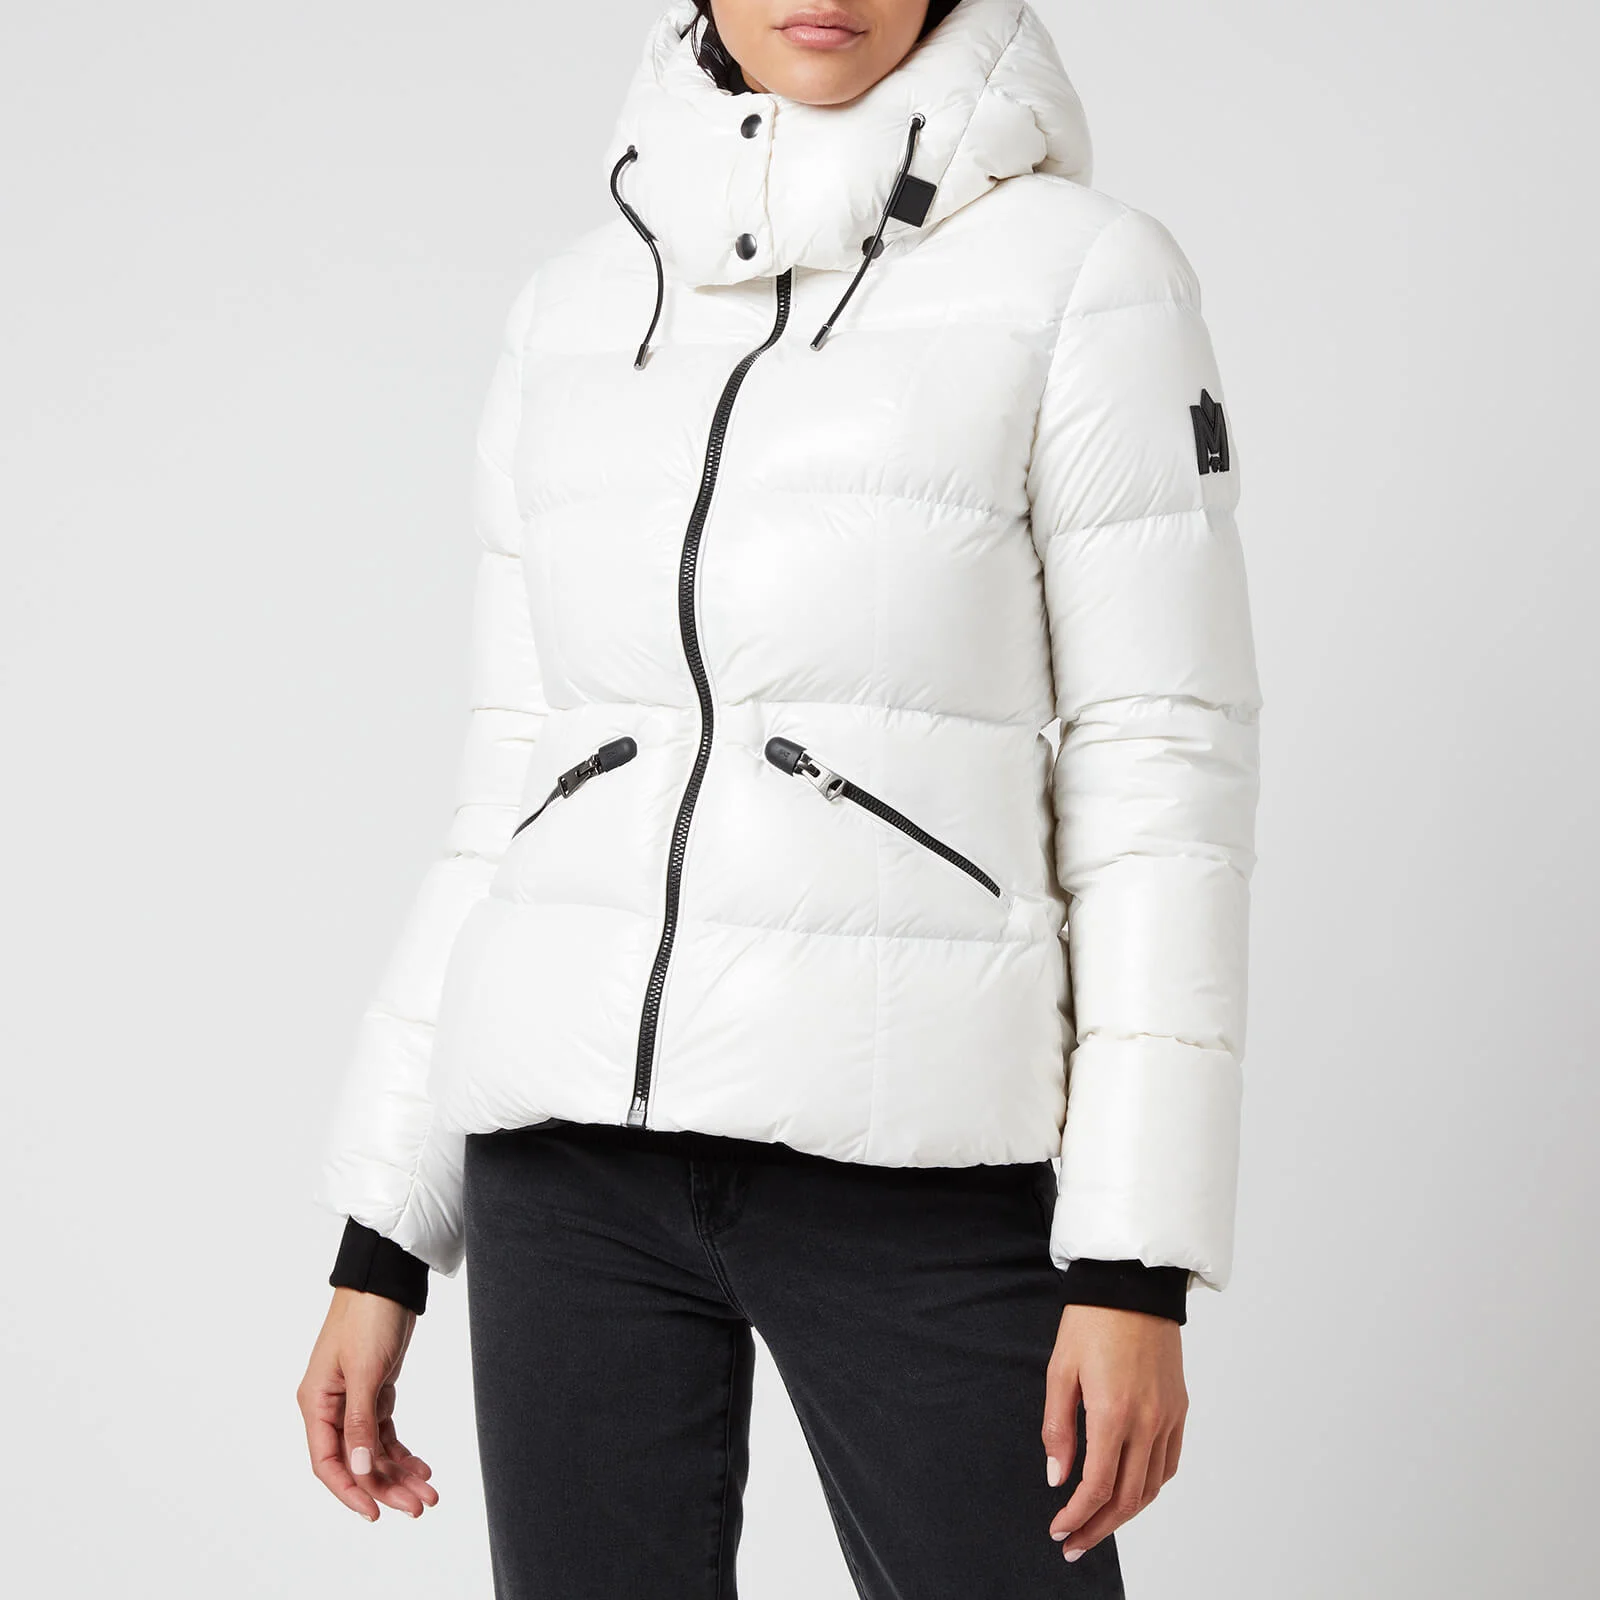 Mackage Women's Madalyn-R Light Down Jacket with Hood - Off White Image 1